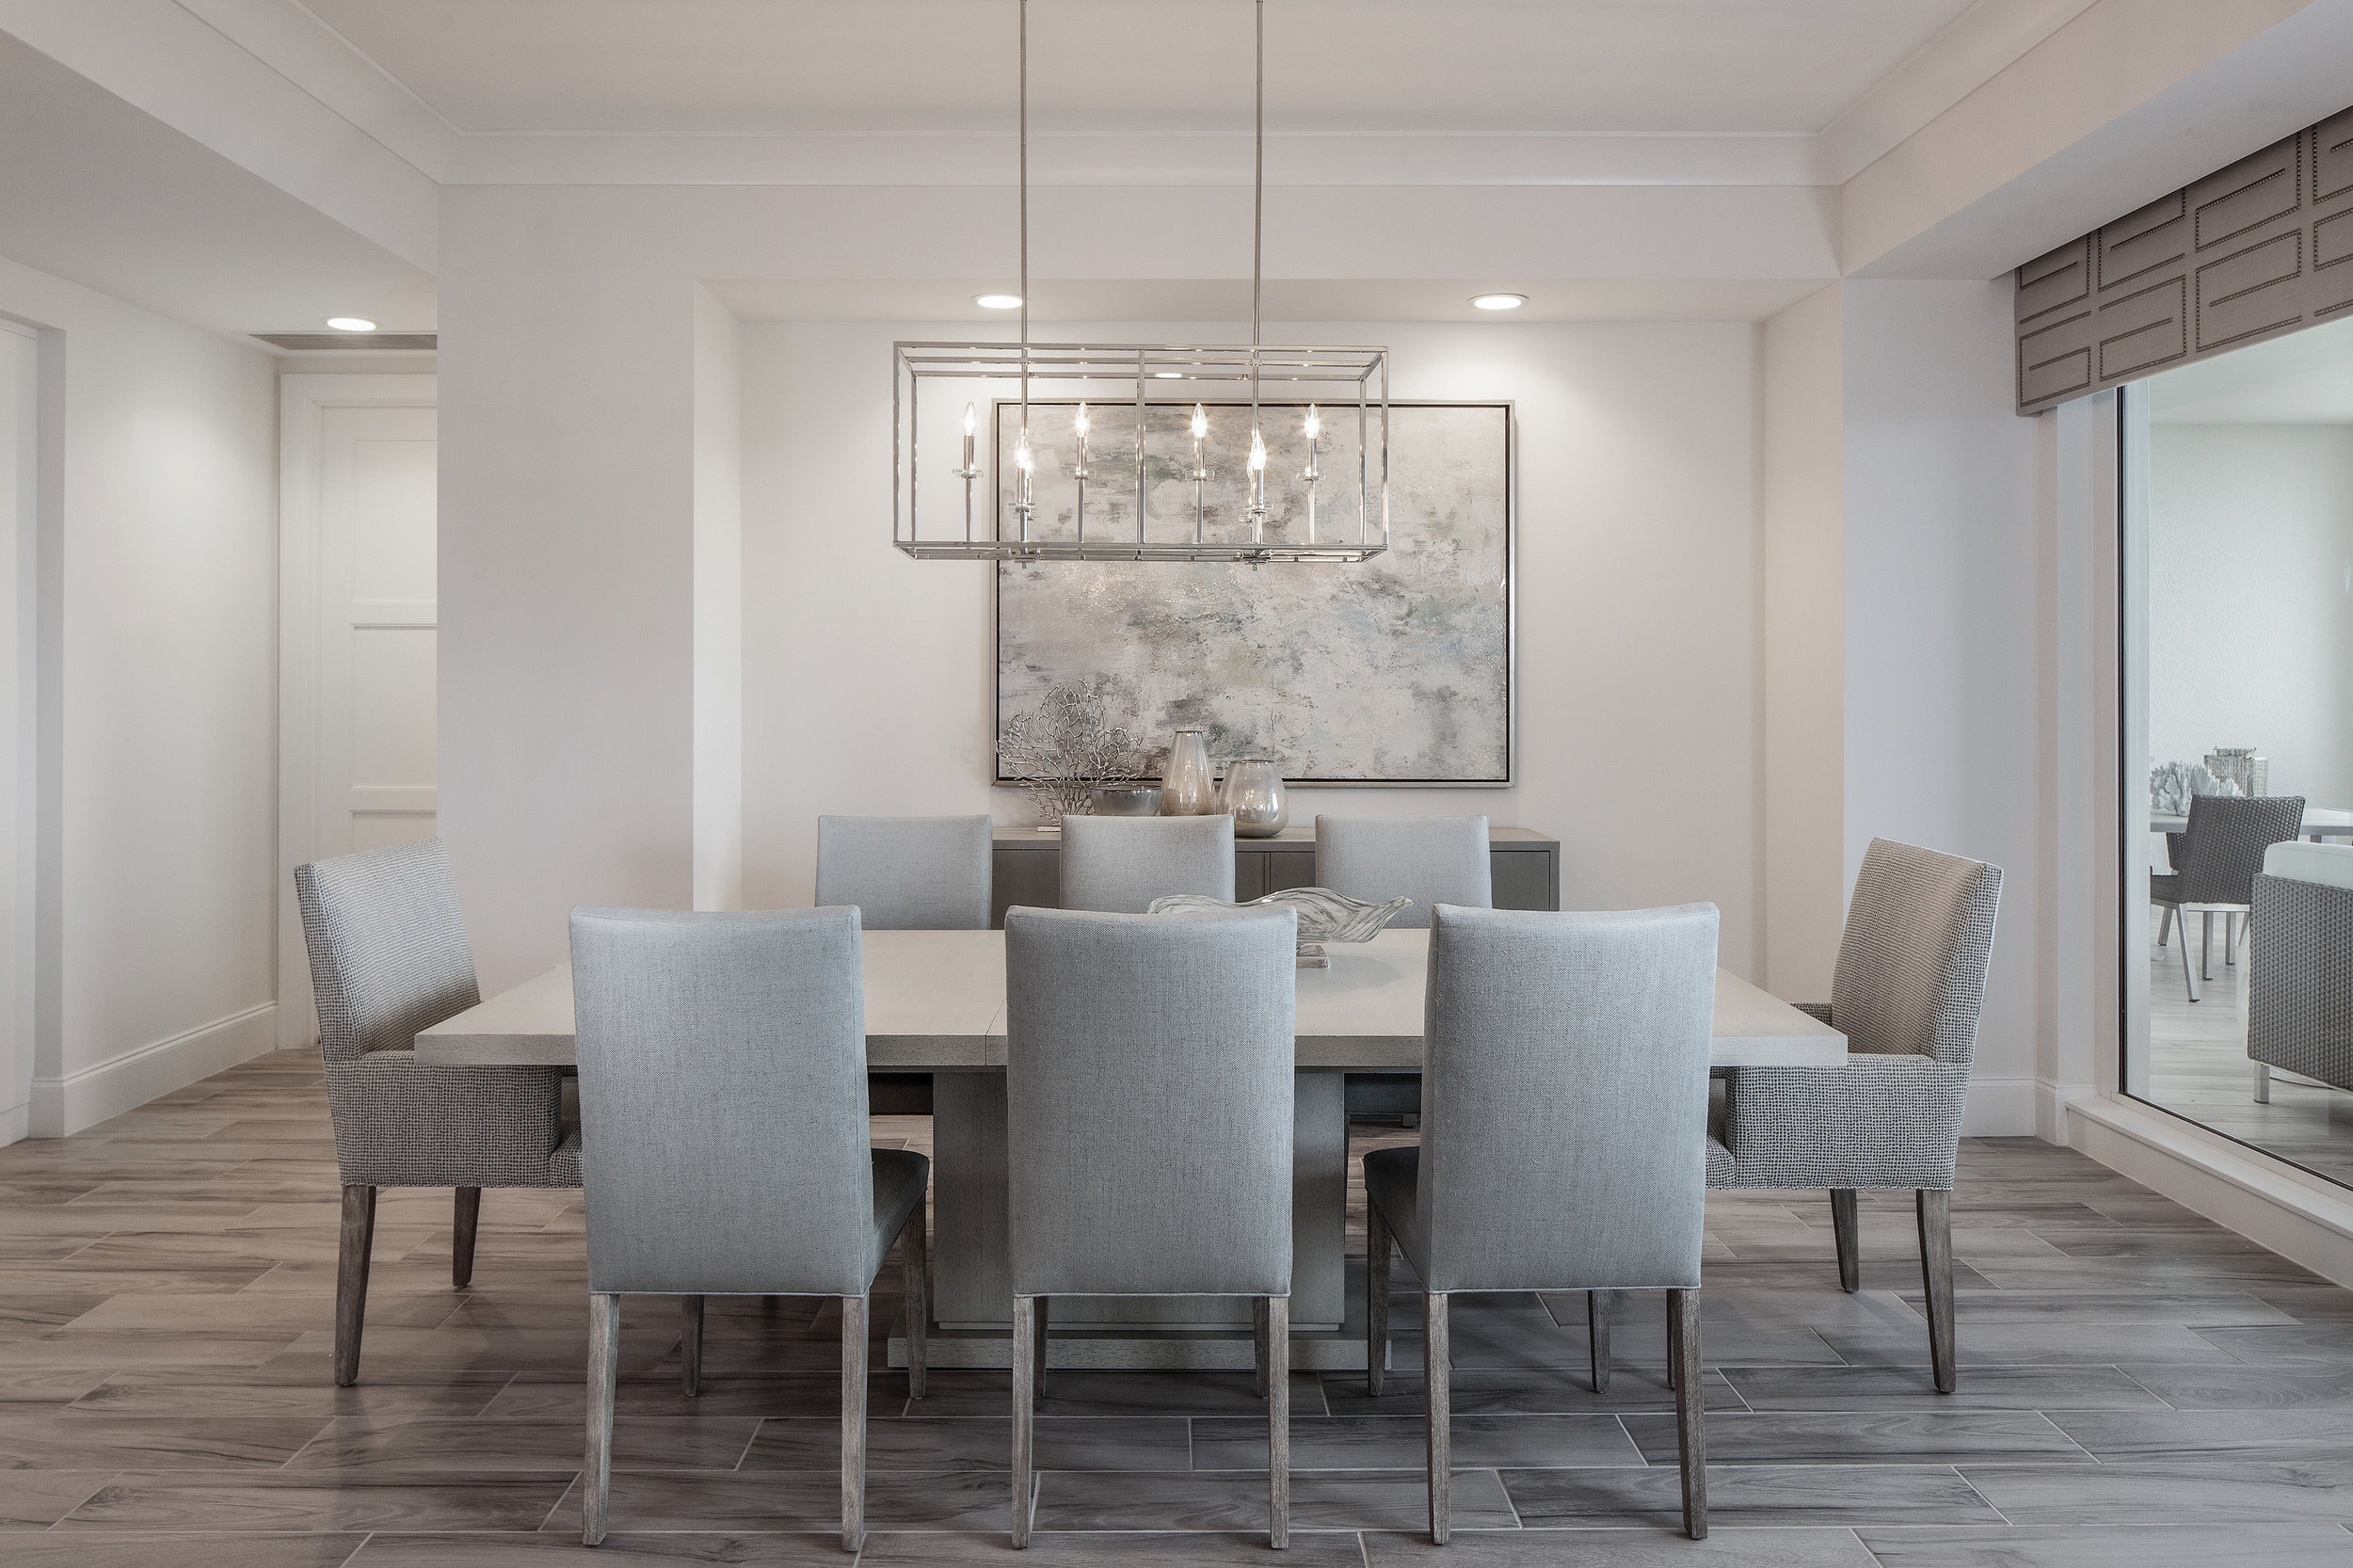  This dining room is a wonderful venue for dinner parties both formal and casual. The space easily accommodates the large Vanguard table with driftwood finish. The painting beautifully matches the pale hues of the walls while the cornice, with custom